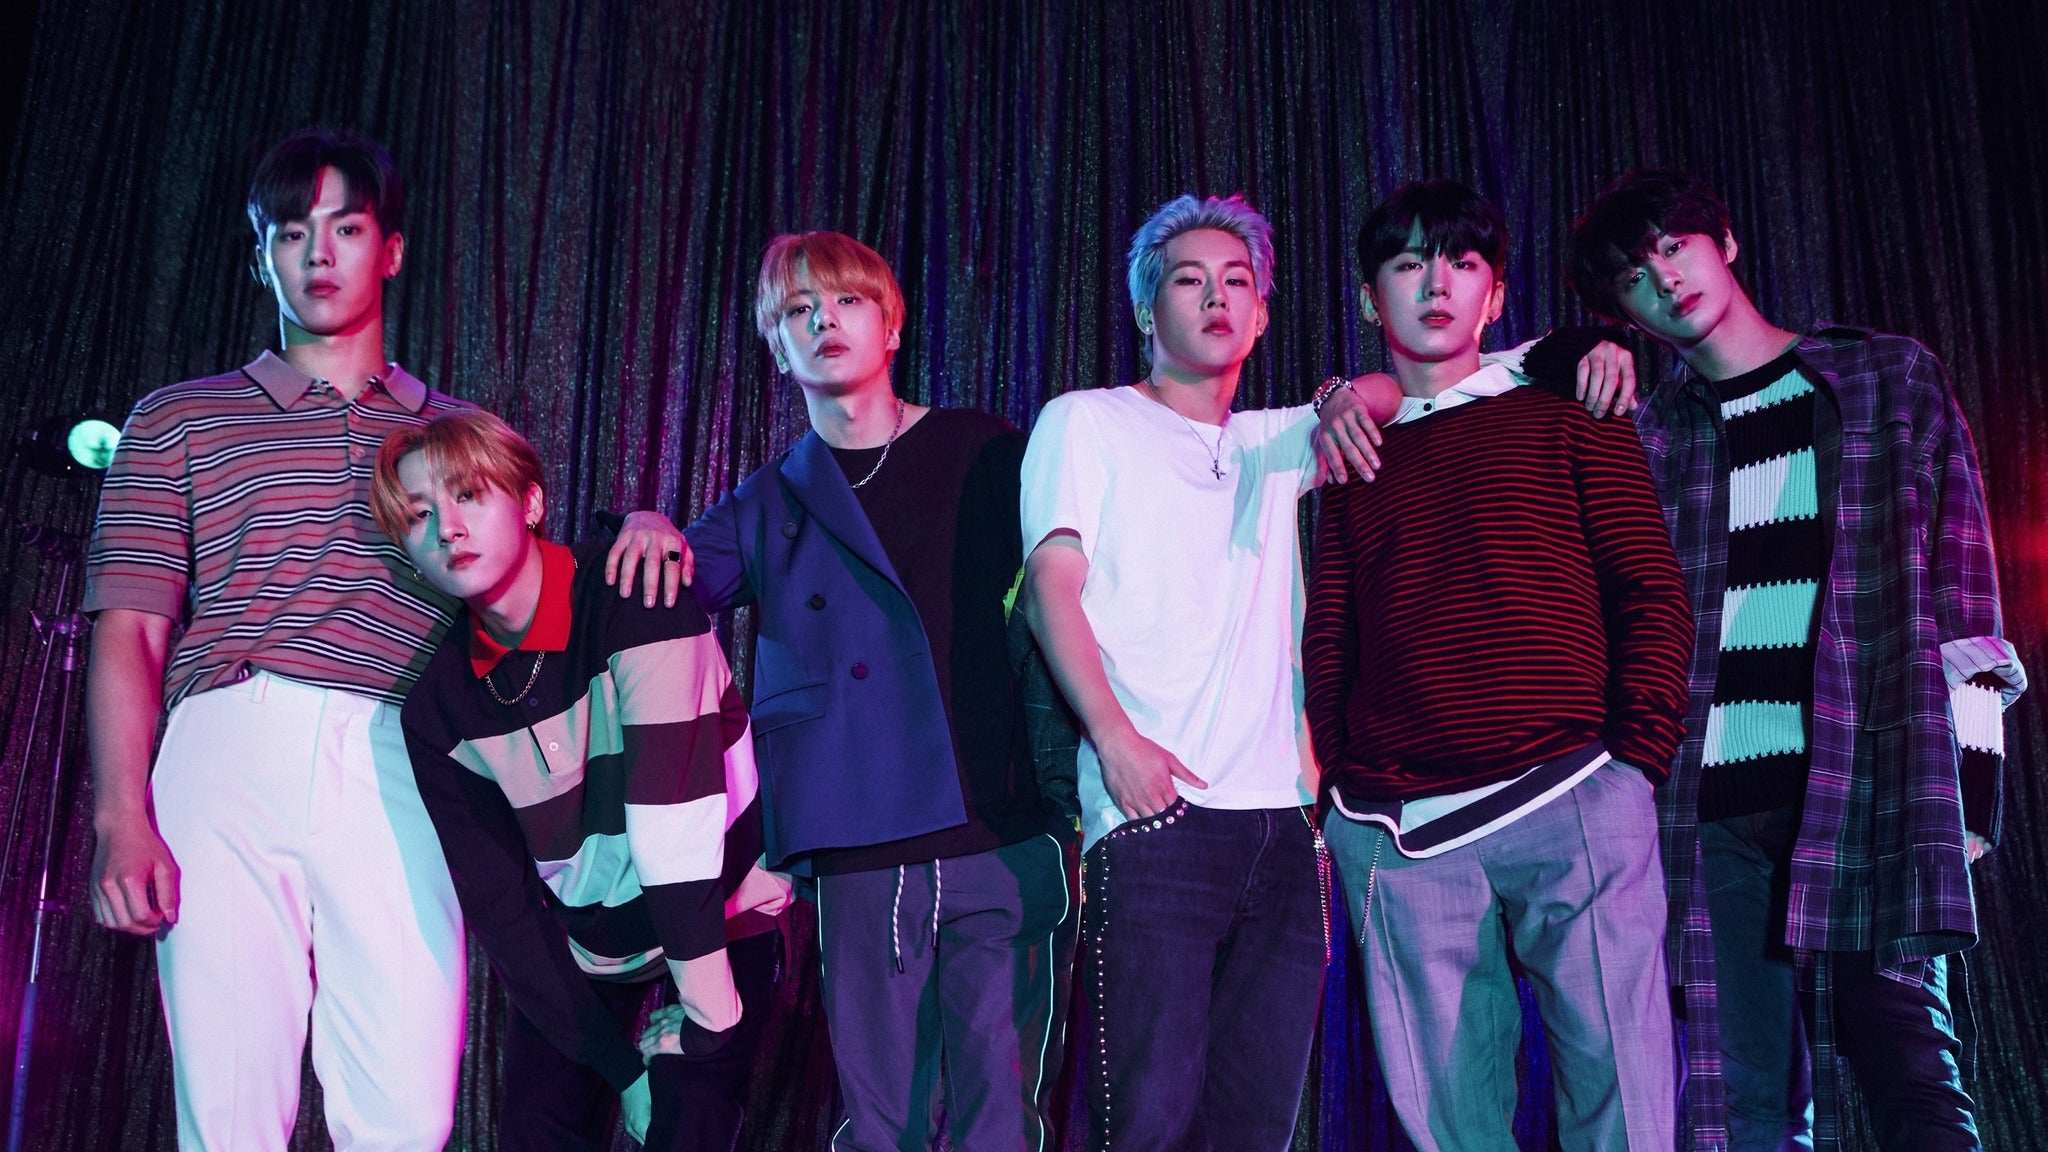 Korst ingenieur Portier Monsta X to begin work on new music after contract talks, with I.M quitting  their label but still part of the K-pop group. 'I love you,' he tells fans  | South China